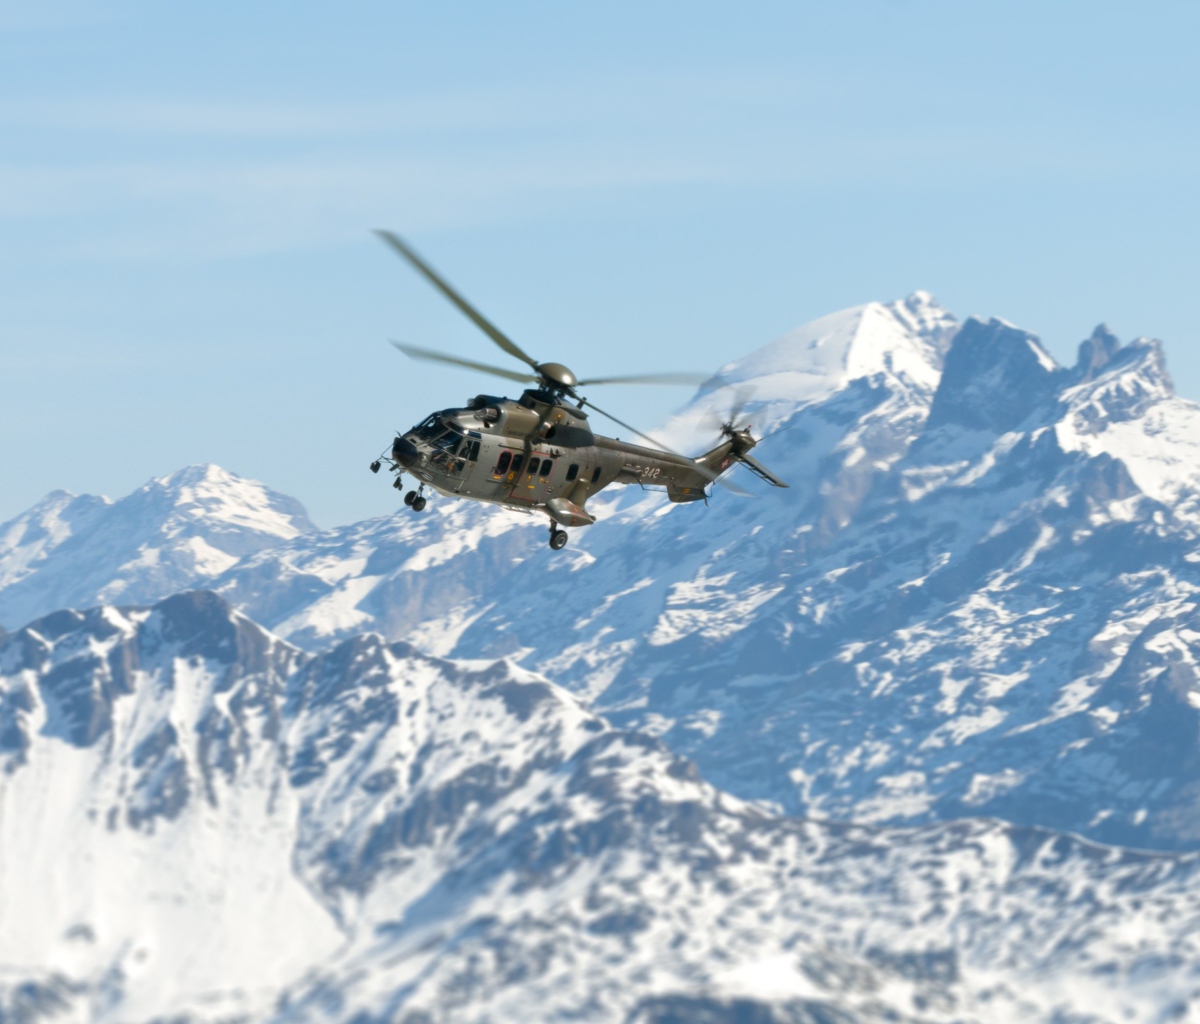 Helicopter Over Snowy Mountains wallpaper 1200x1024